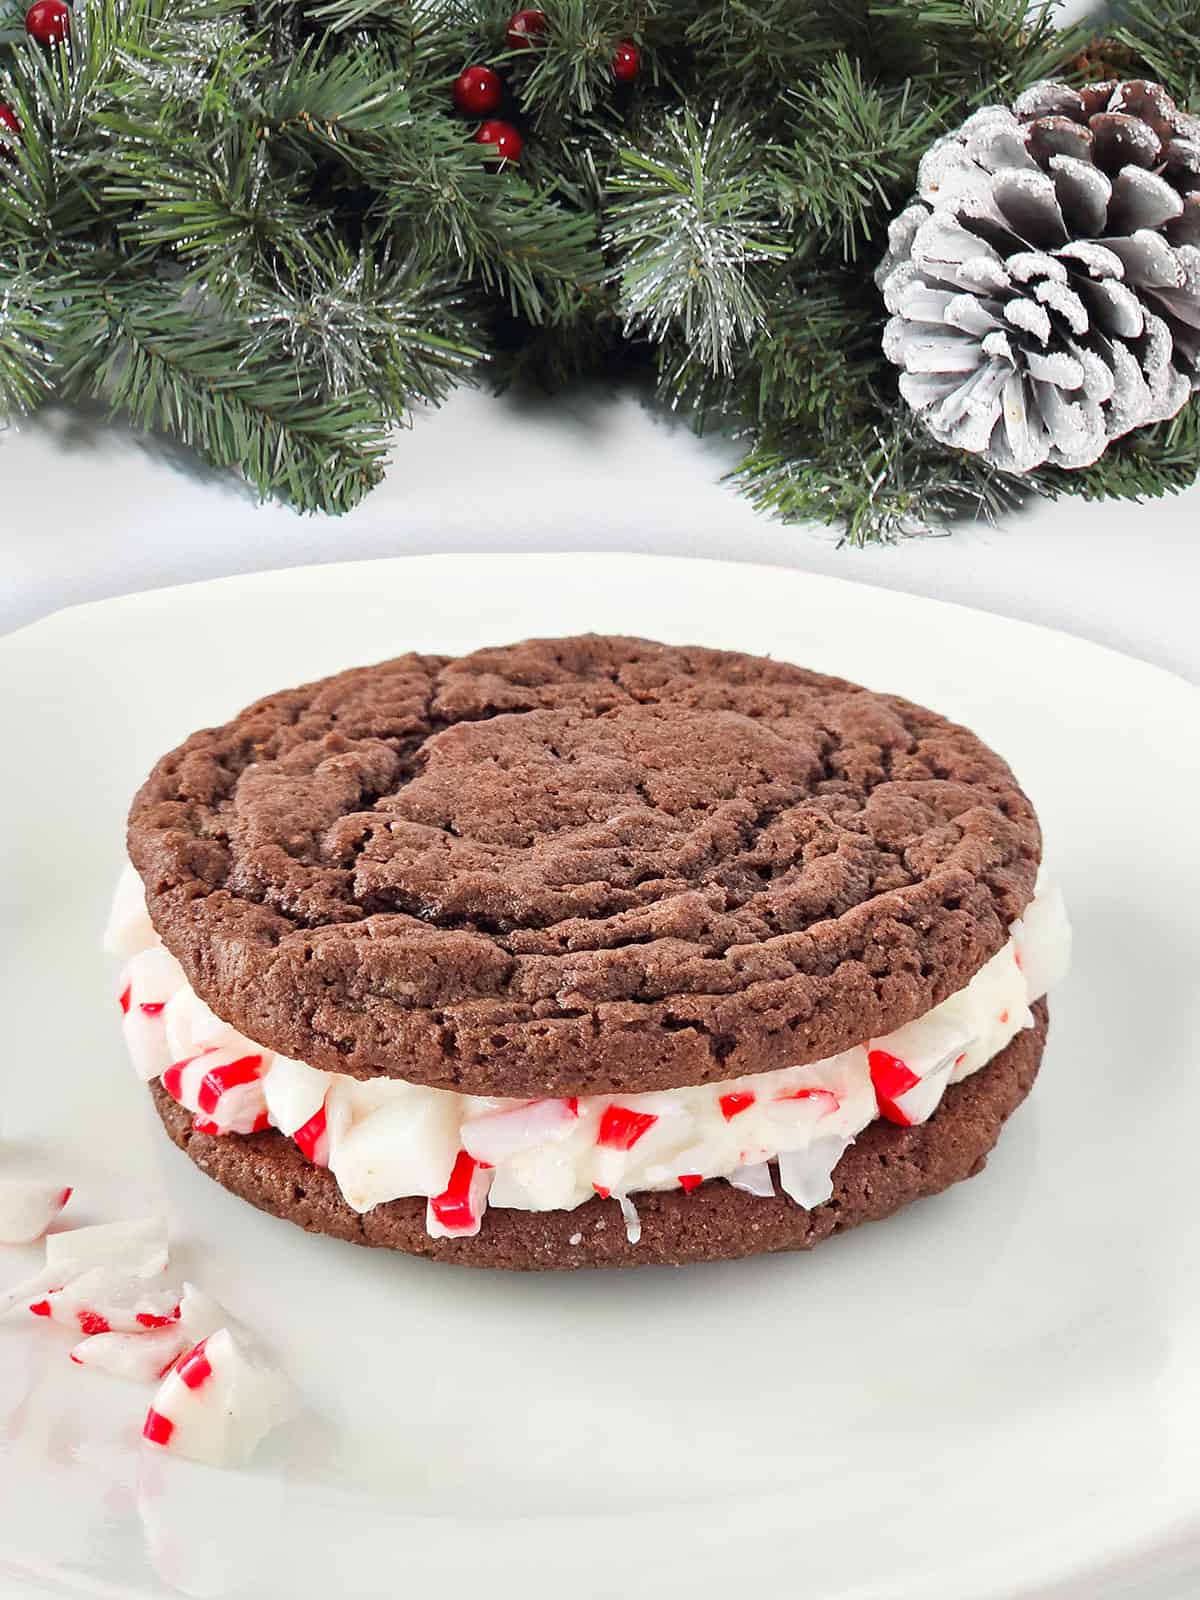 Single cookie showing frosting and peppermint garnish.